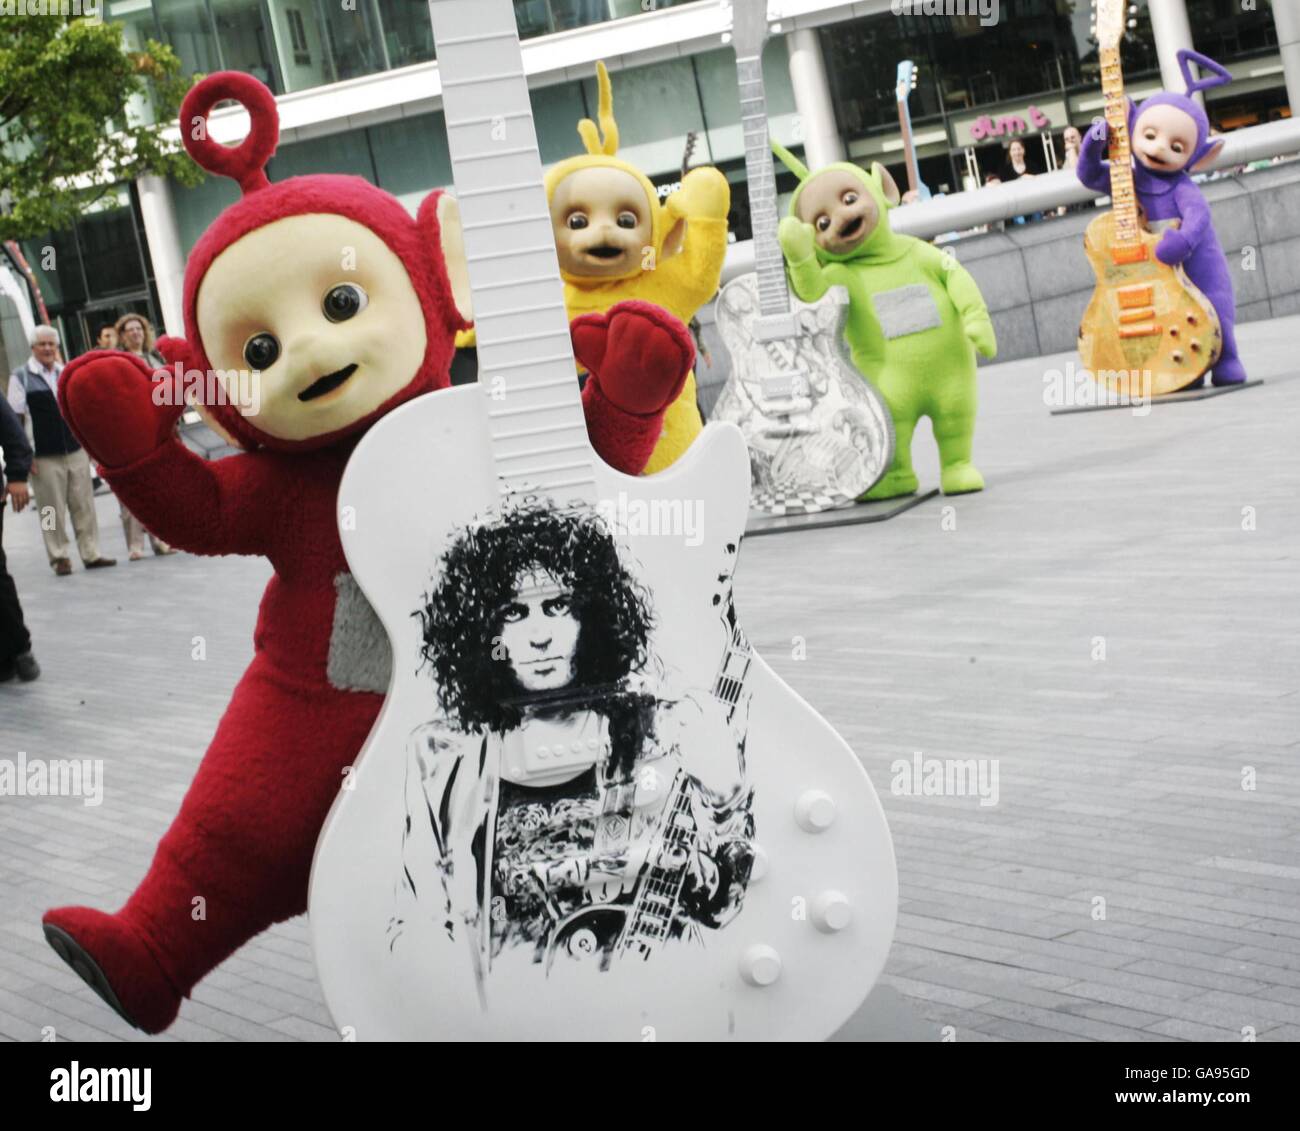 Teletubbies mark 10th birthday. s most famous landmarks including the guitars outside the GLA to celebrate their 10th year on television. Stock Photo